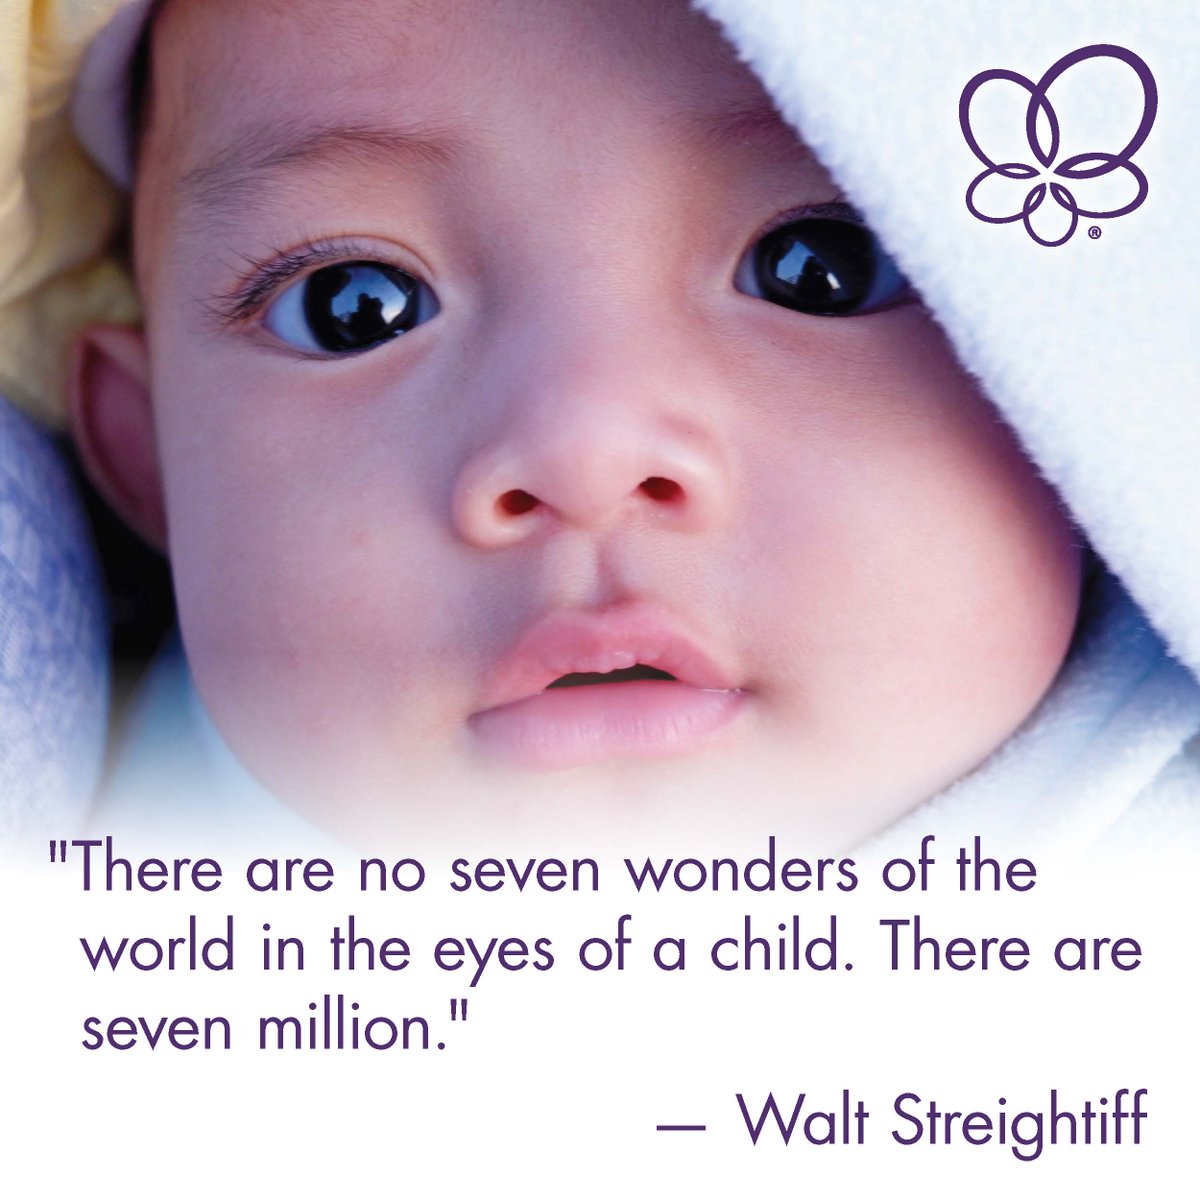 Let's take a cue from children and see the world through eyes that seek out goodness in everything. Today, let's challenge ourselves to find and appreciate the positive aspects of the world around us. #MotivationalMonday #NICU #Inspiration